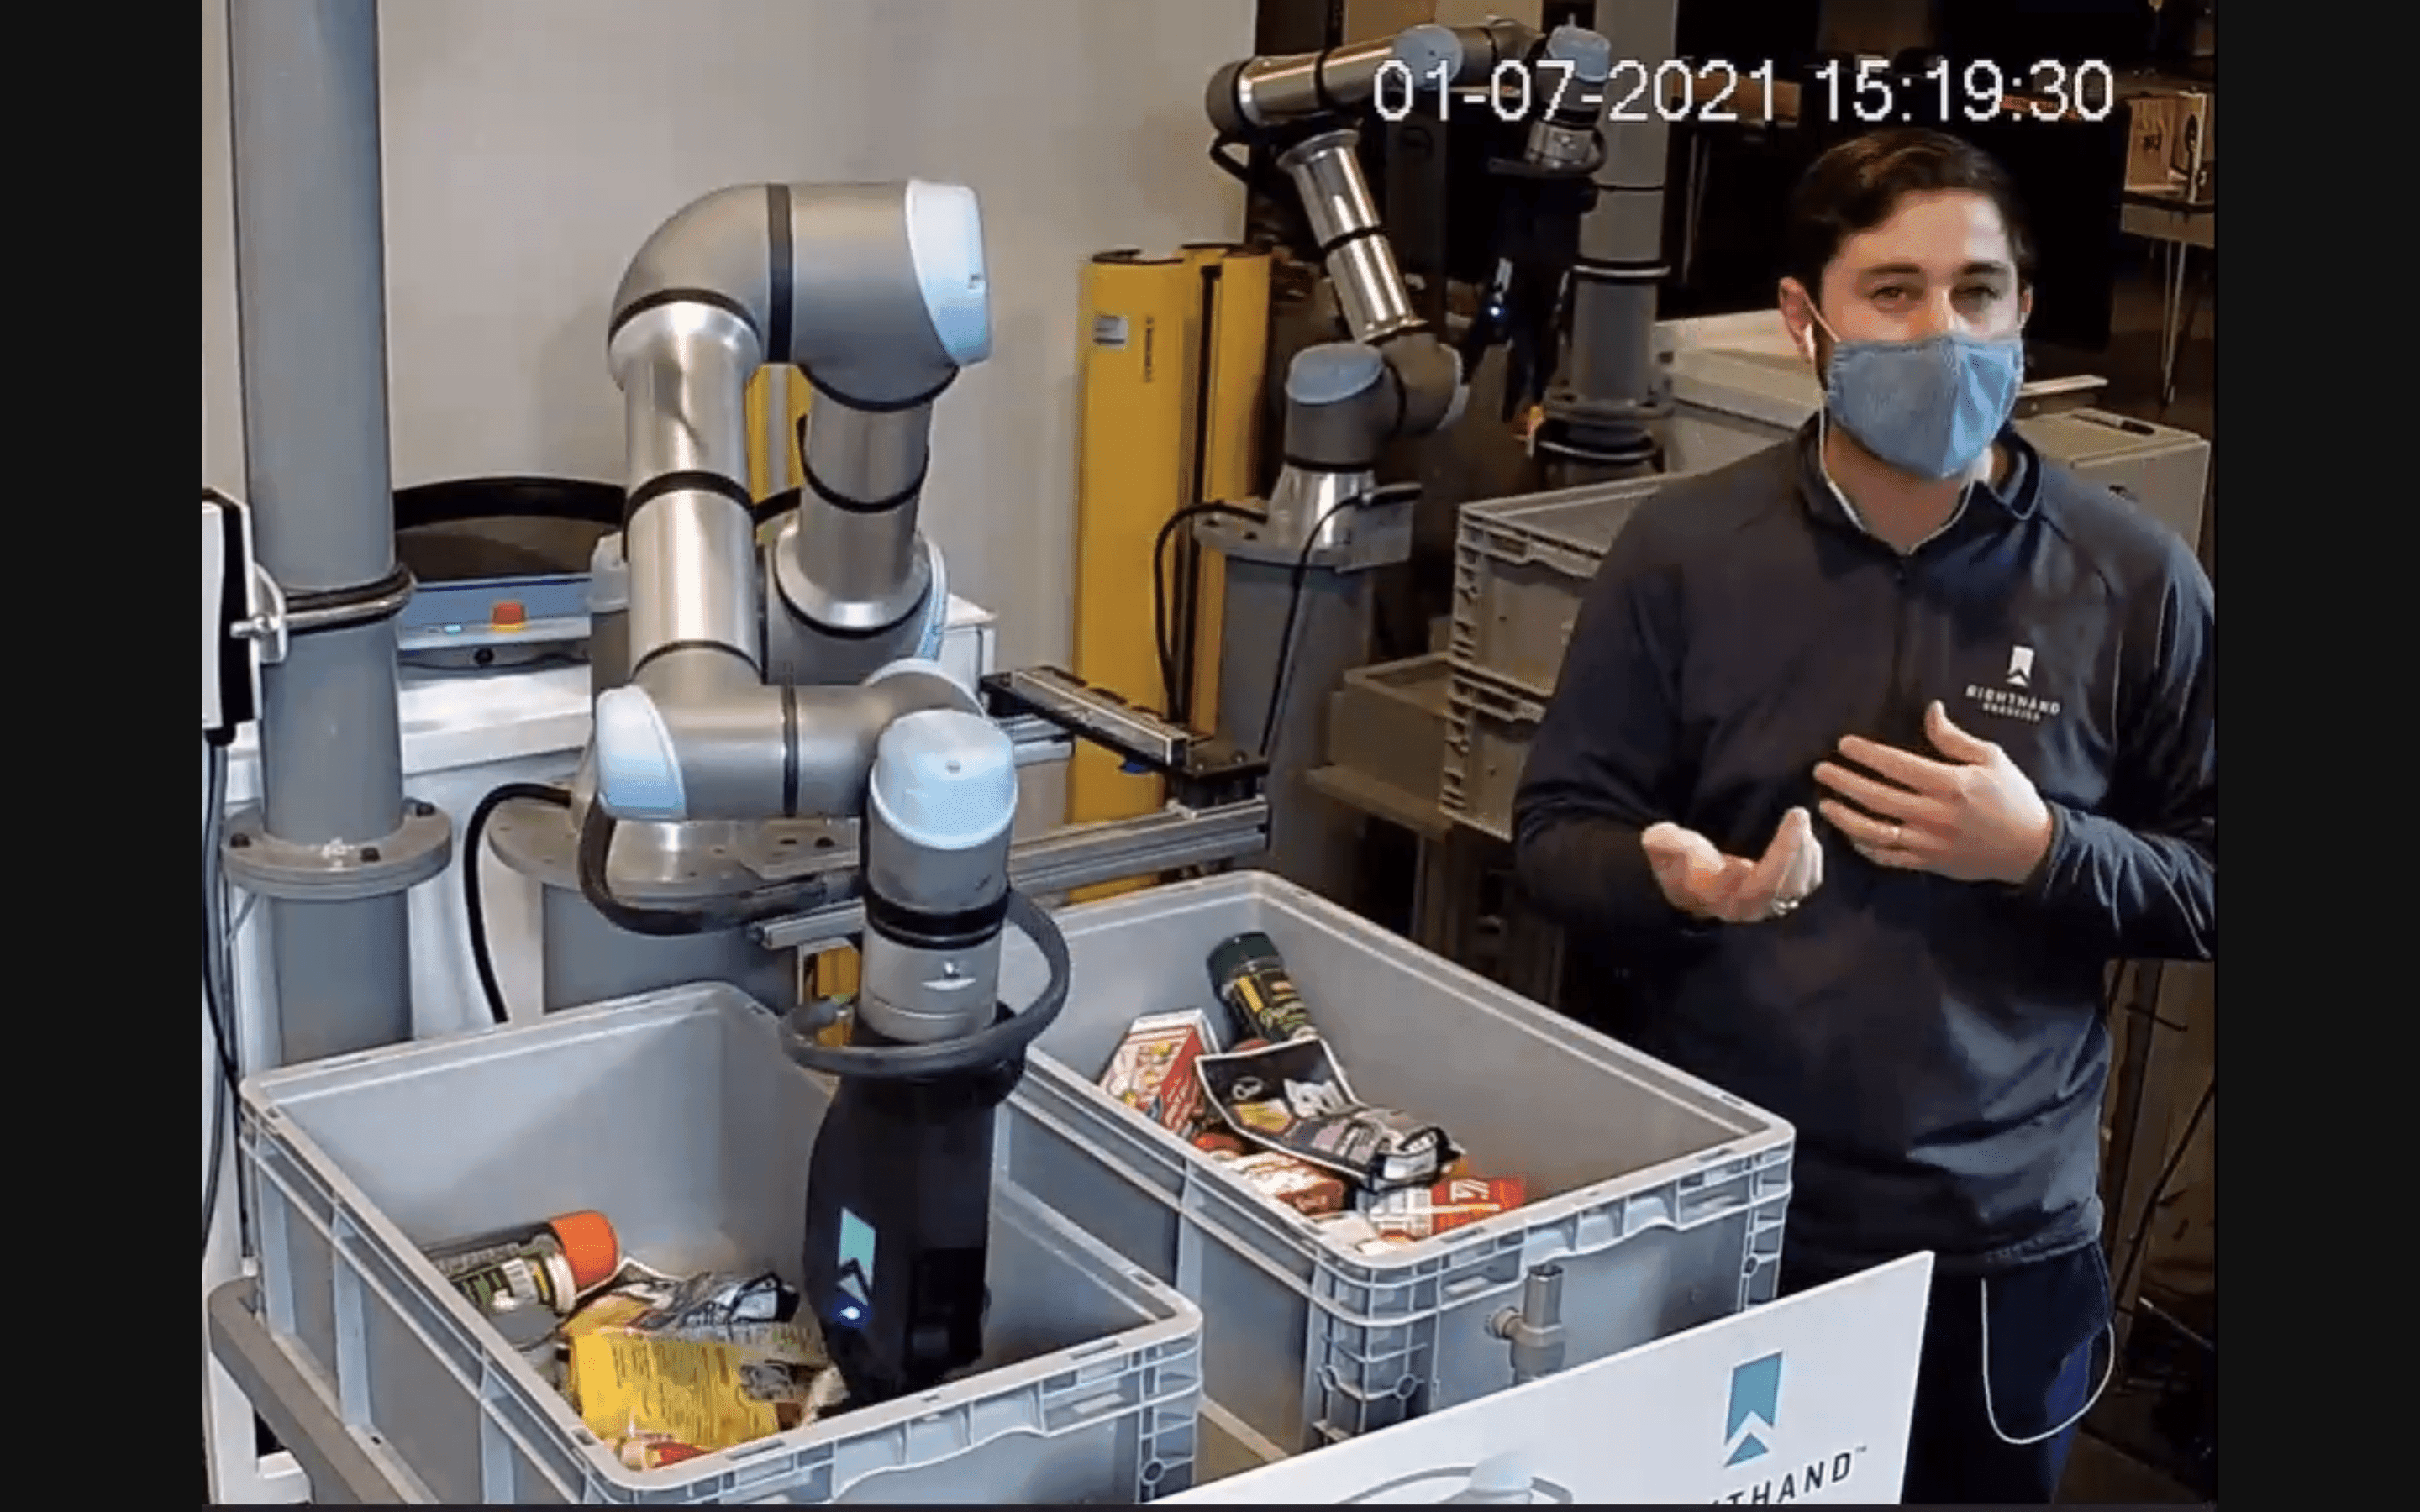 The Latest Article: Autonomous robotic piece-picking reaches adolescence in turbulent times